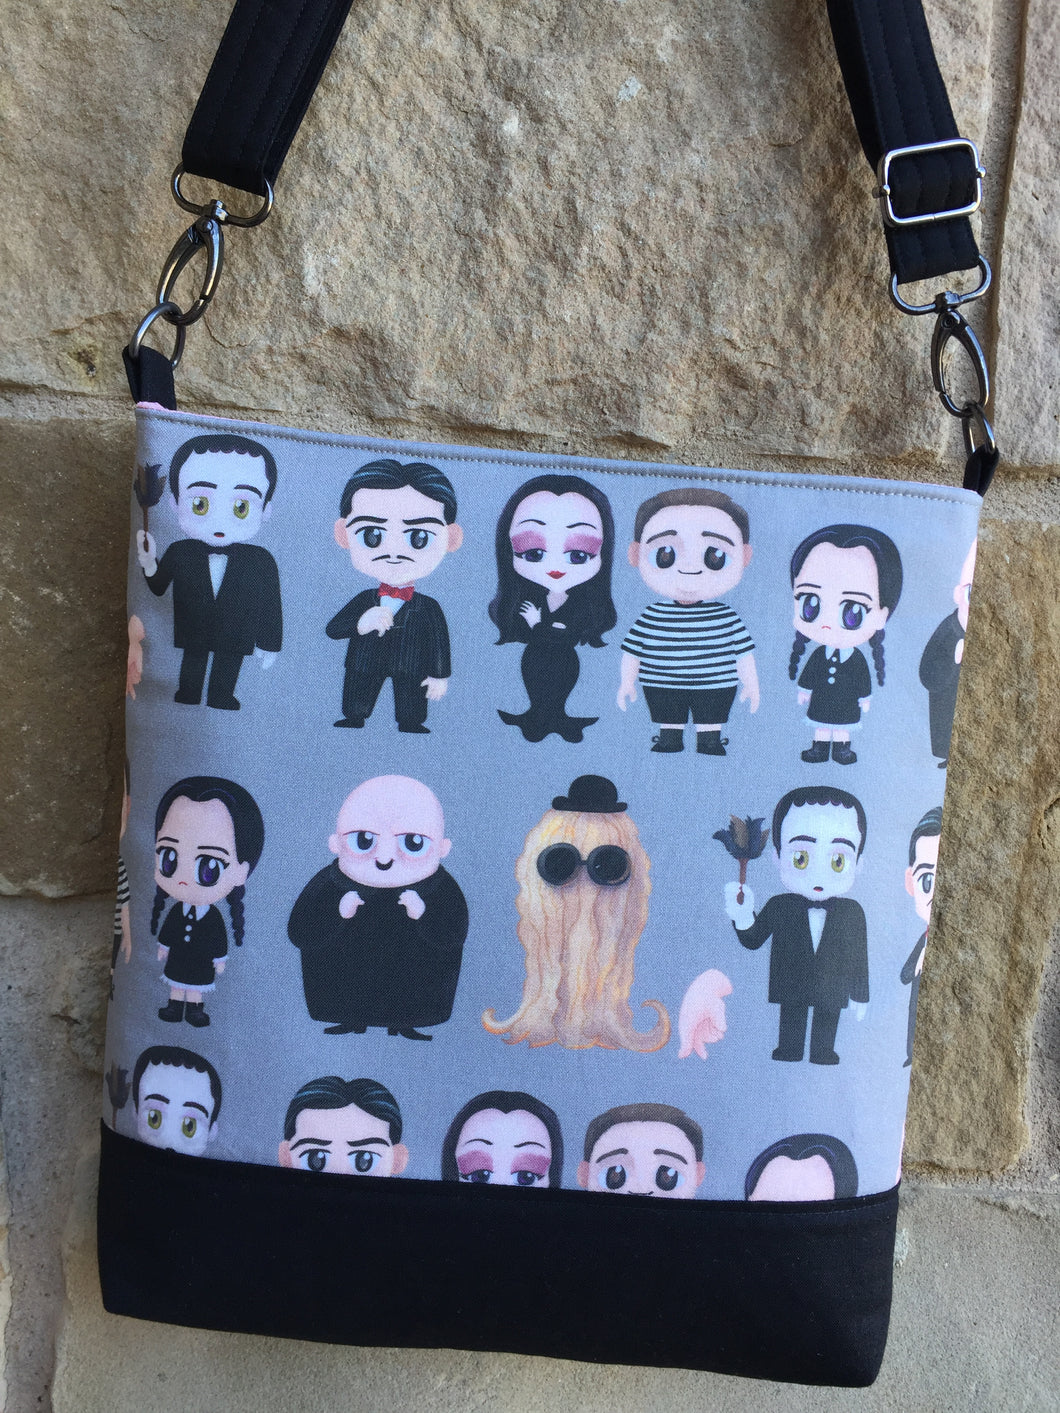 Messenger Bag Made With Kooky Horror Family Inspired Fabric - Adjustable Strap - Zippered Closure - Zippered Pocket - Cross Body Bag